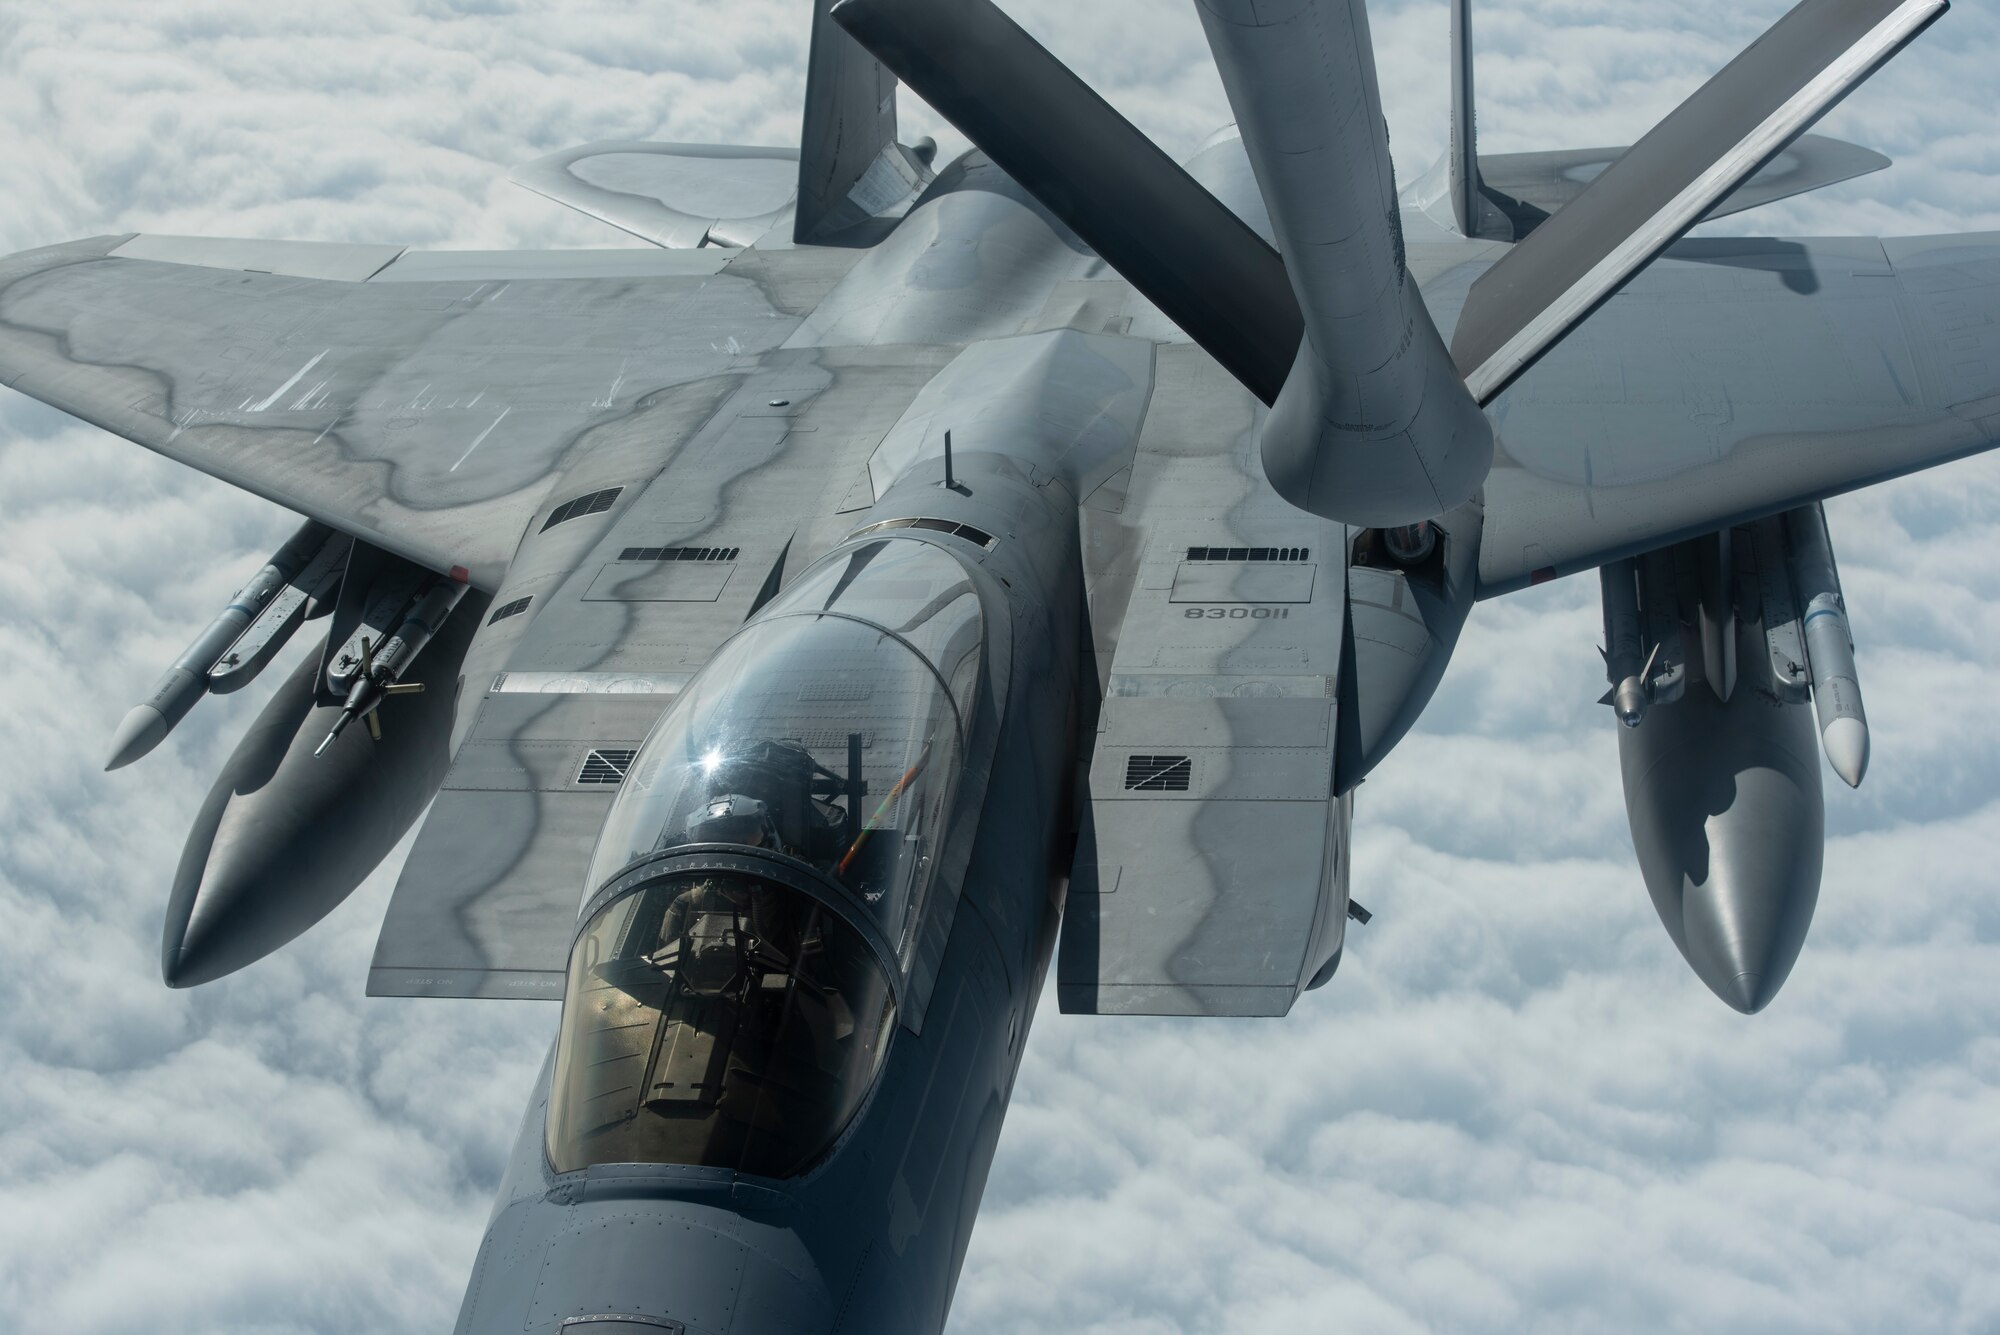 A 67th Fighter Squadron F-15C Eagle and 909th Air Refueling Squadron KC-135 Stratotanker, both from Kadena Air Base, Japan, conduct aerial refueling during RED FLAG-Alaska 19-3 at Eielson Air Force Base, Alaska, Aug. 7, 2019.